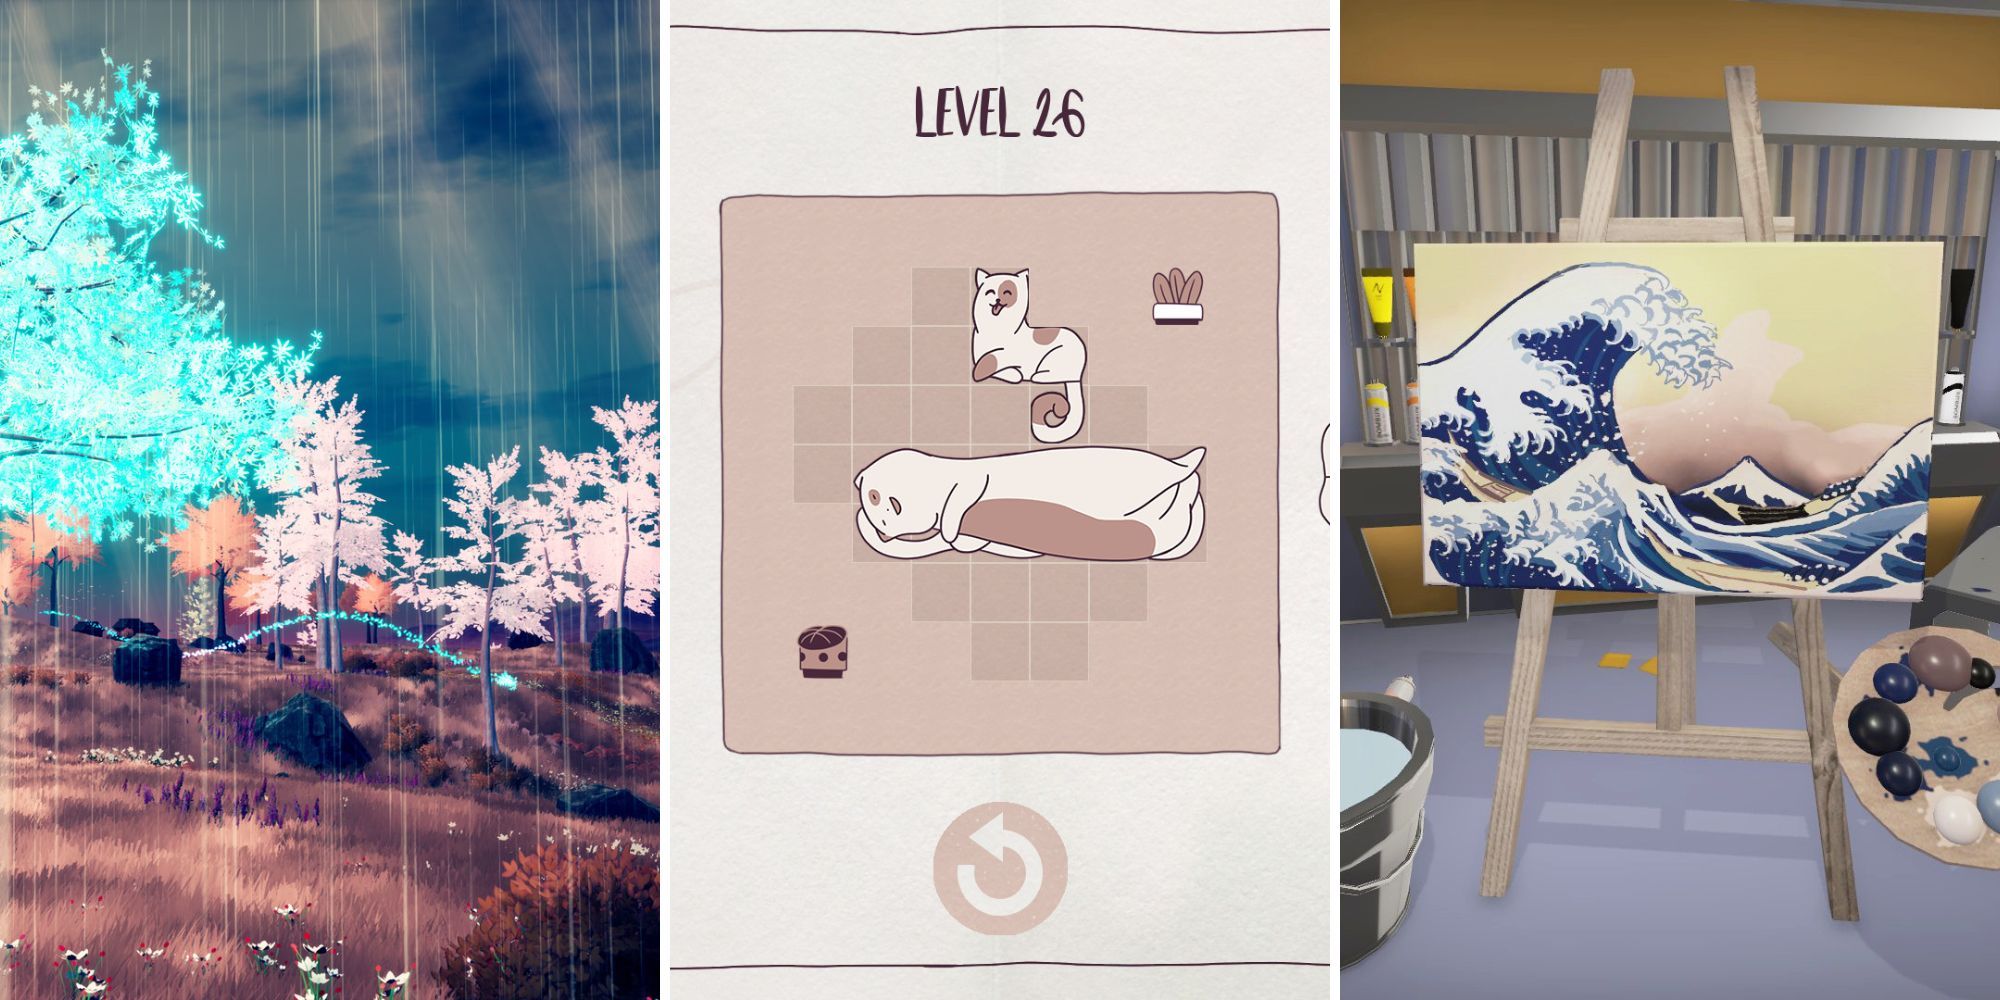 A grid of images showing the cozy games The Companion, Cats Organized Neatly, and SuchArt: Genius Artist Simulator